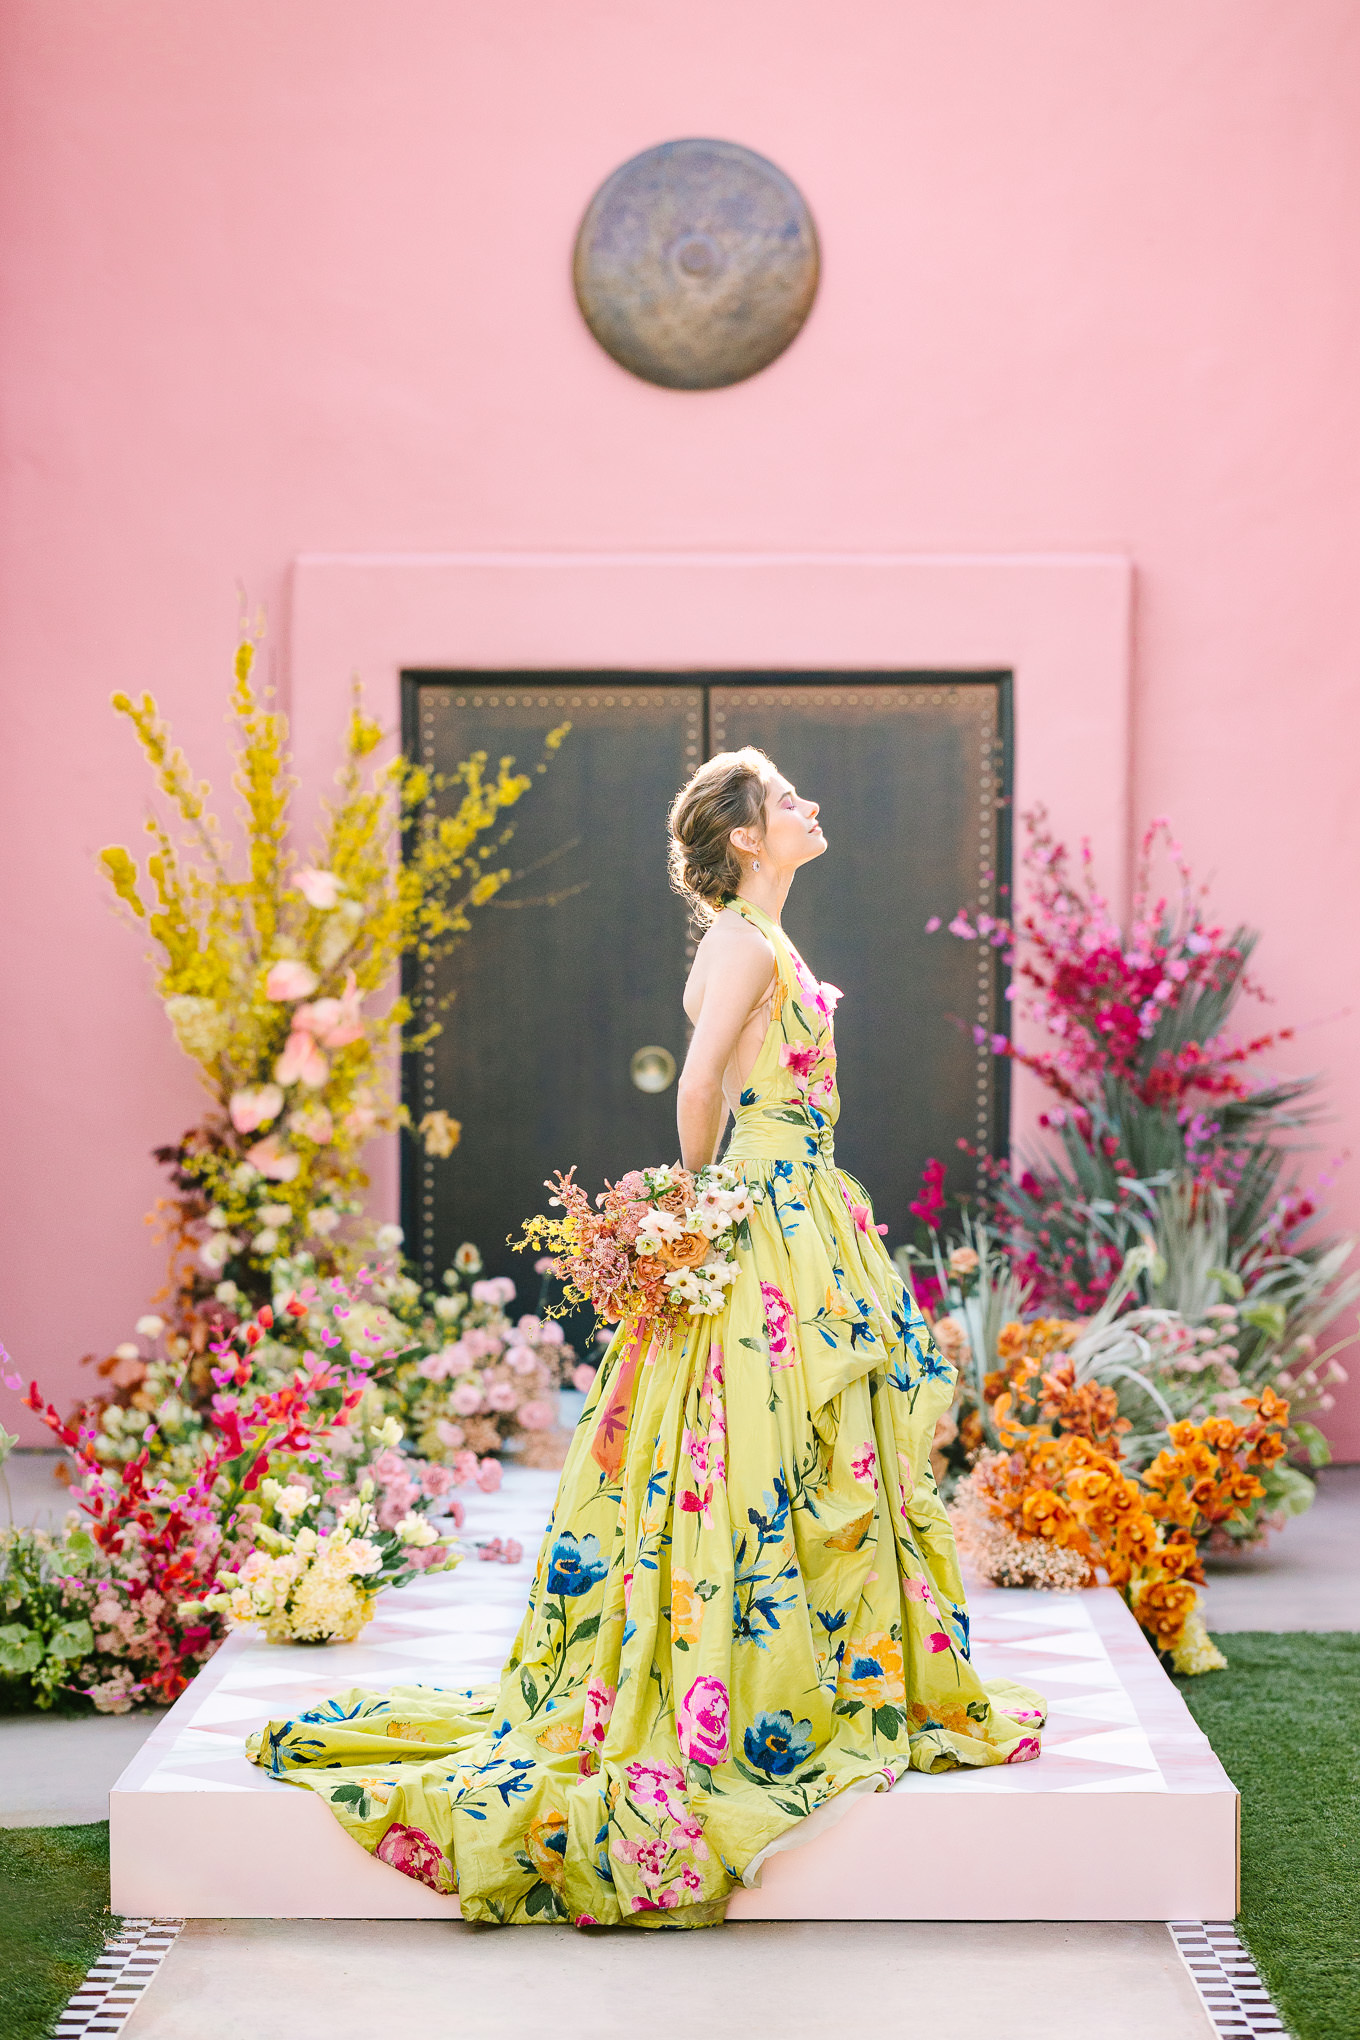 Chartreuse floral embroidered Marchesa gown on checkered runway | Kindred Presets x Mary Costa Photography Sands Hotel Ad Campaign | Colorful Palm Springs wedding photography | #palmspringsphotographer #lightroompresets #sandshotel #pinkhotel   Source: Mary Costa Photography | Los Angeles